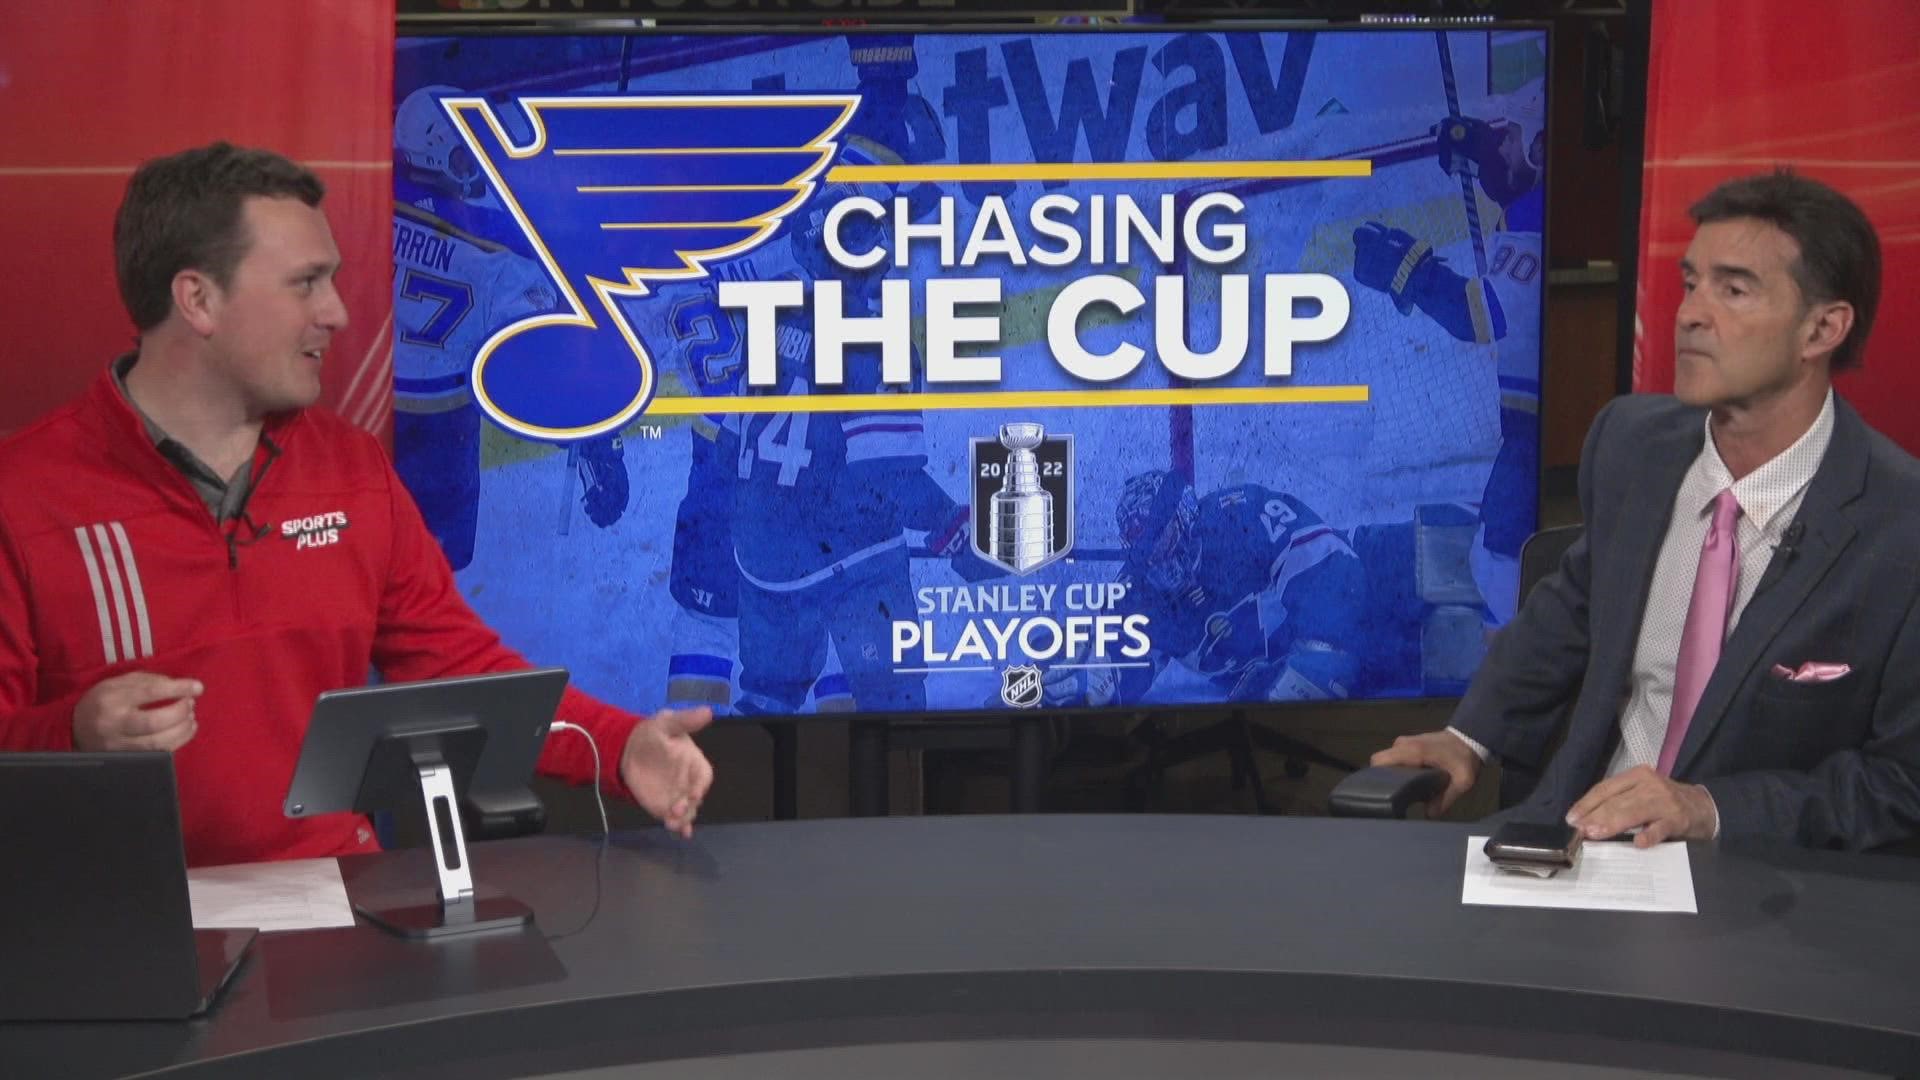 We're geared up for another Blues playoff run, and breaking down every storyline along the way. Here's Frank and Corey ahead of Game 2 against the Wild.